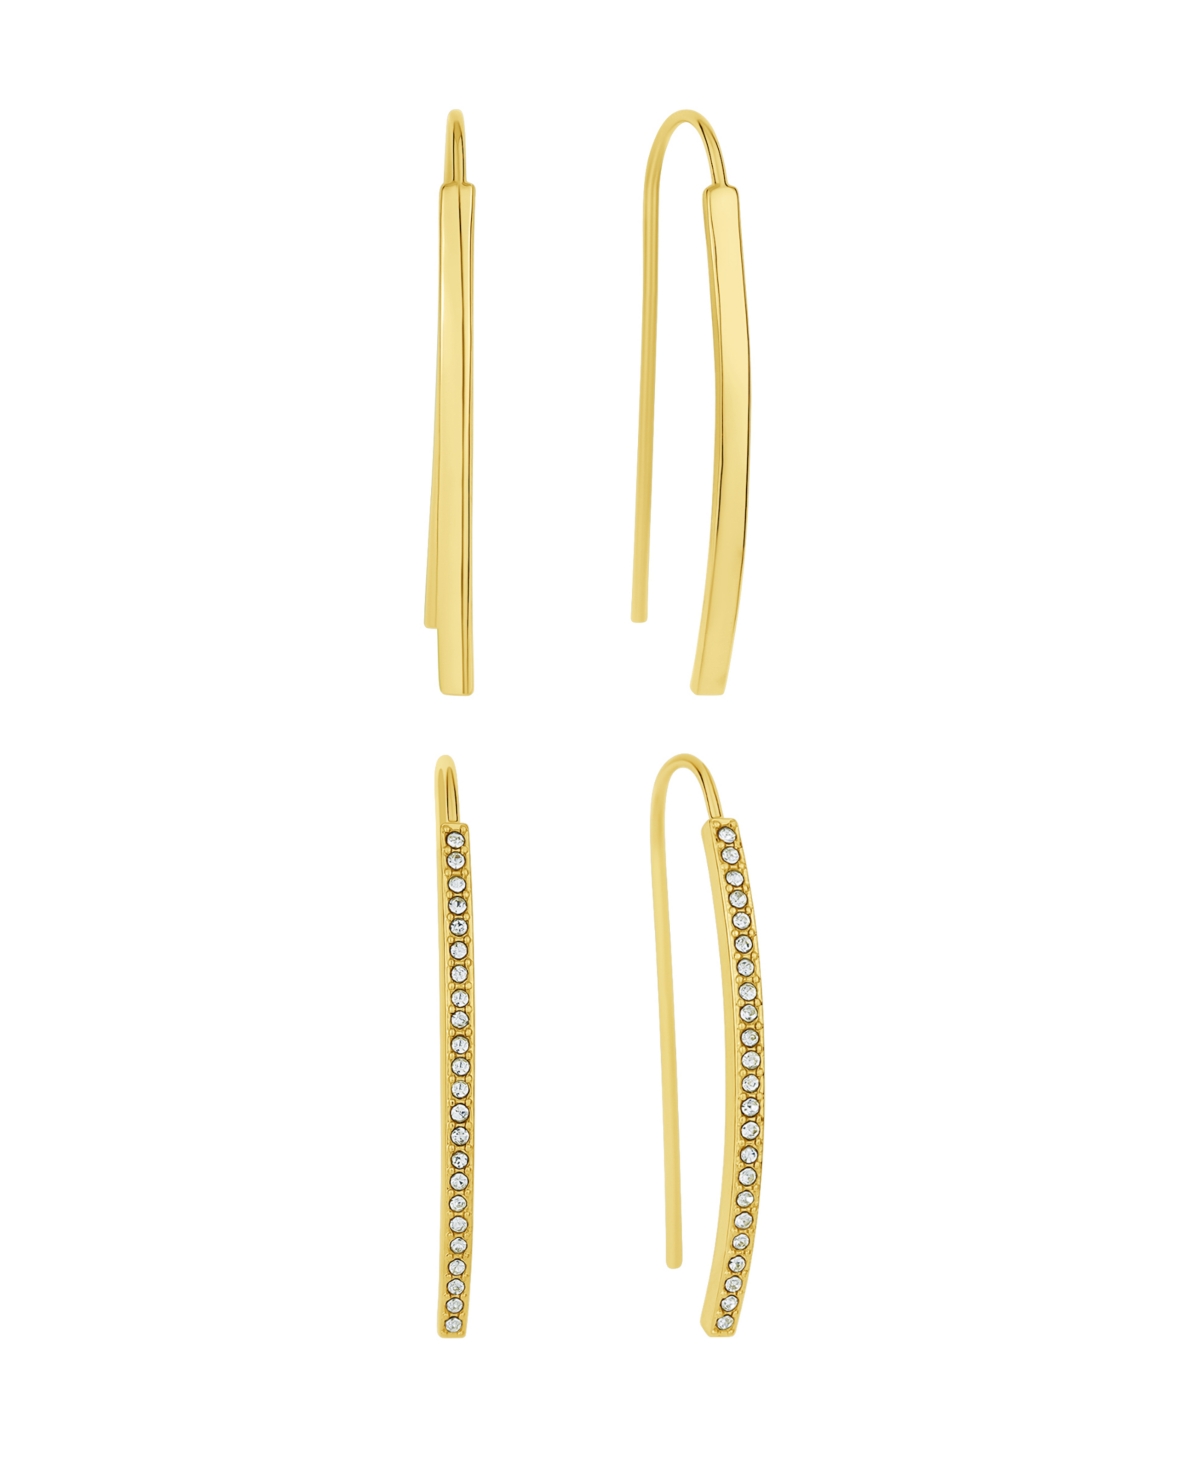 Crystal Curved Bar Earring Set - Gold